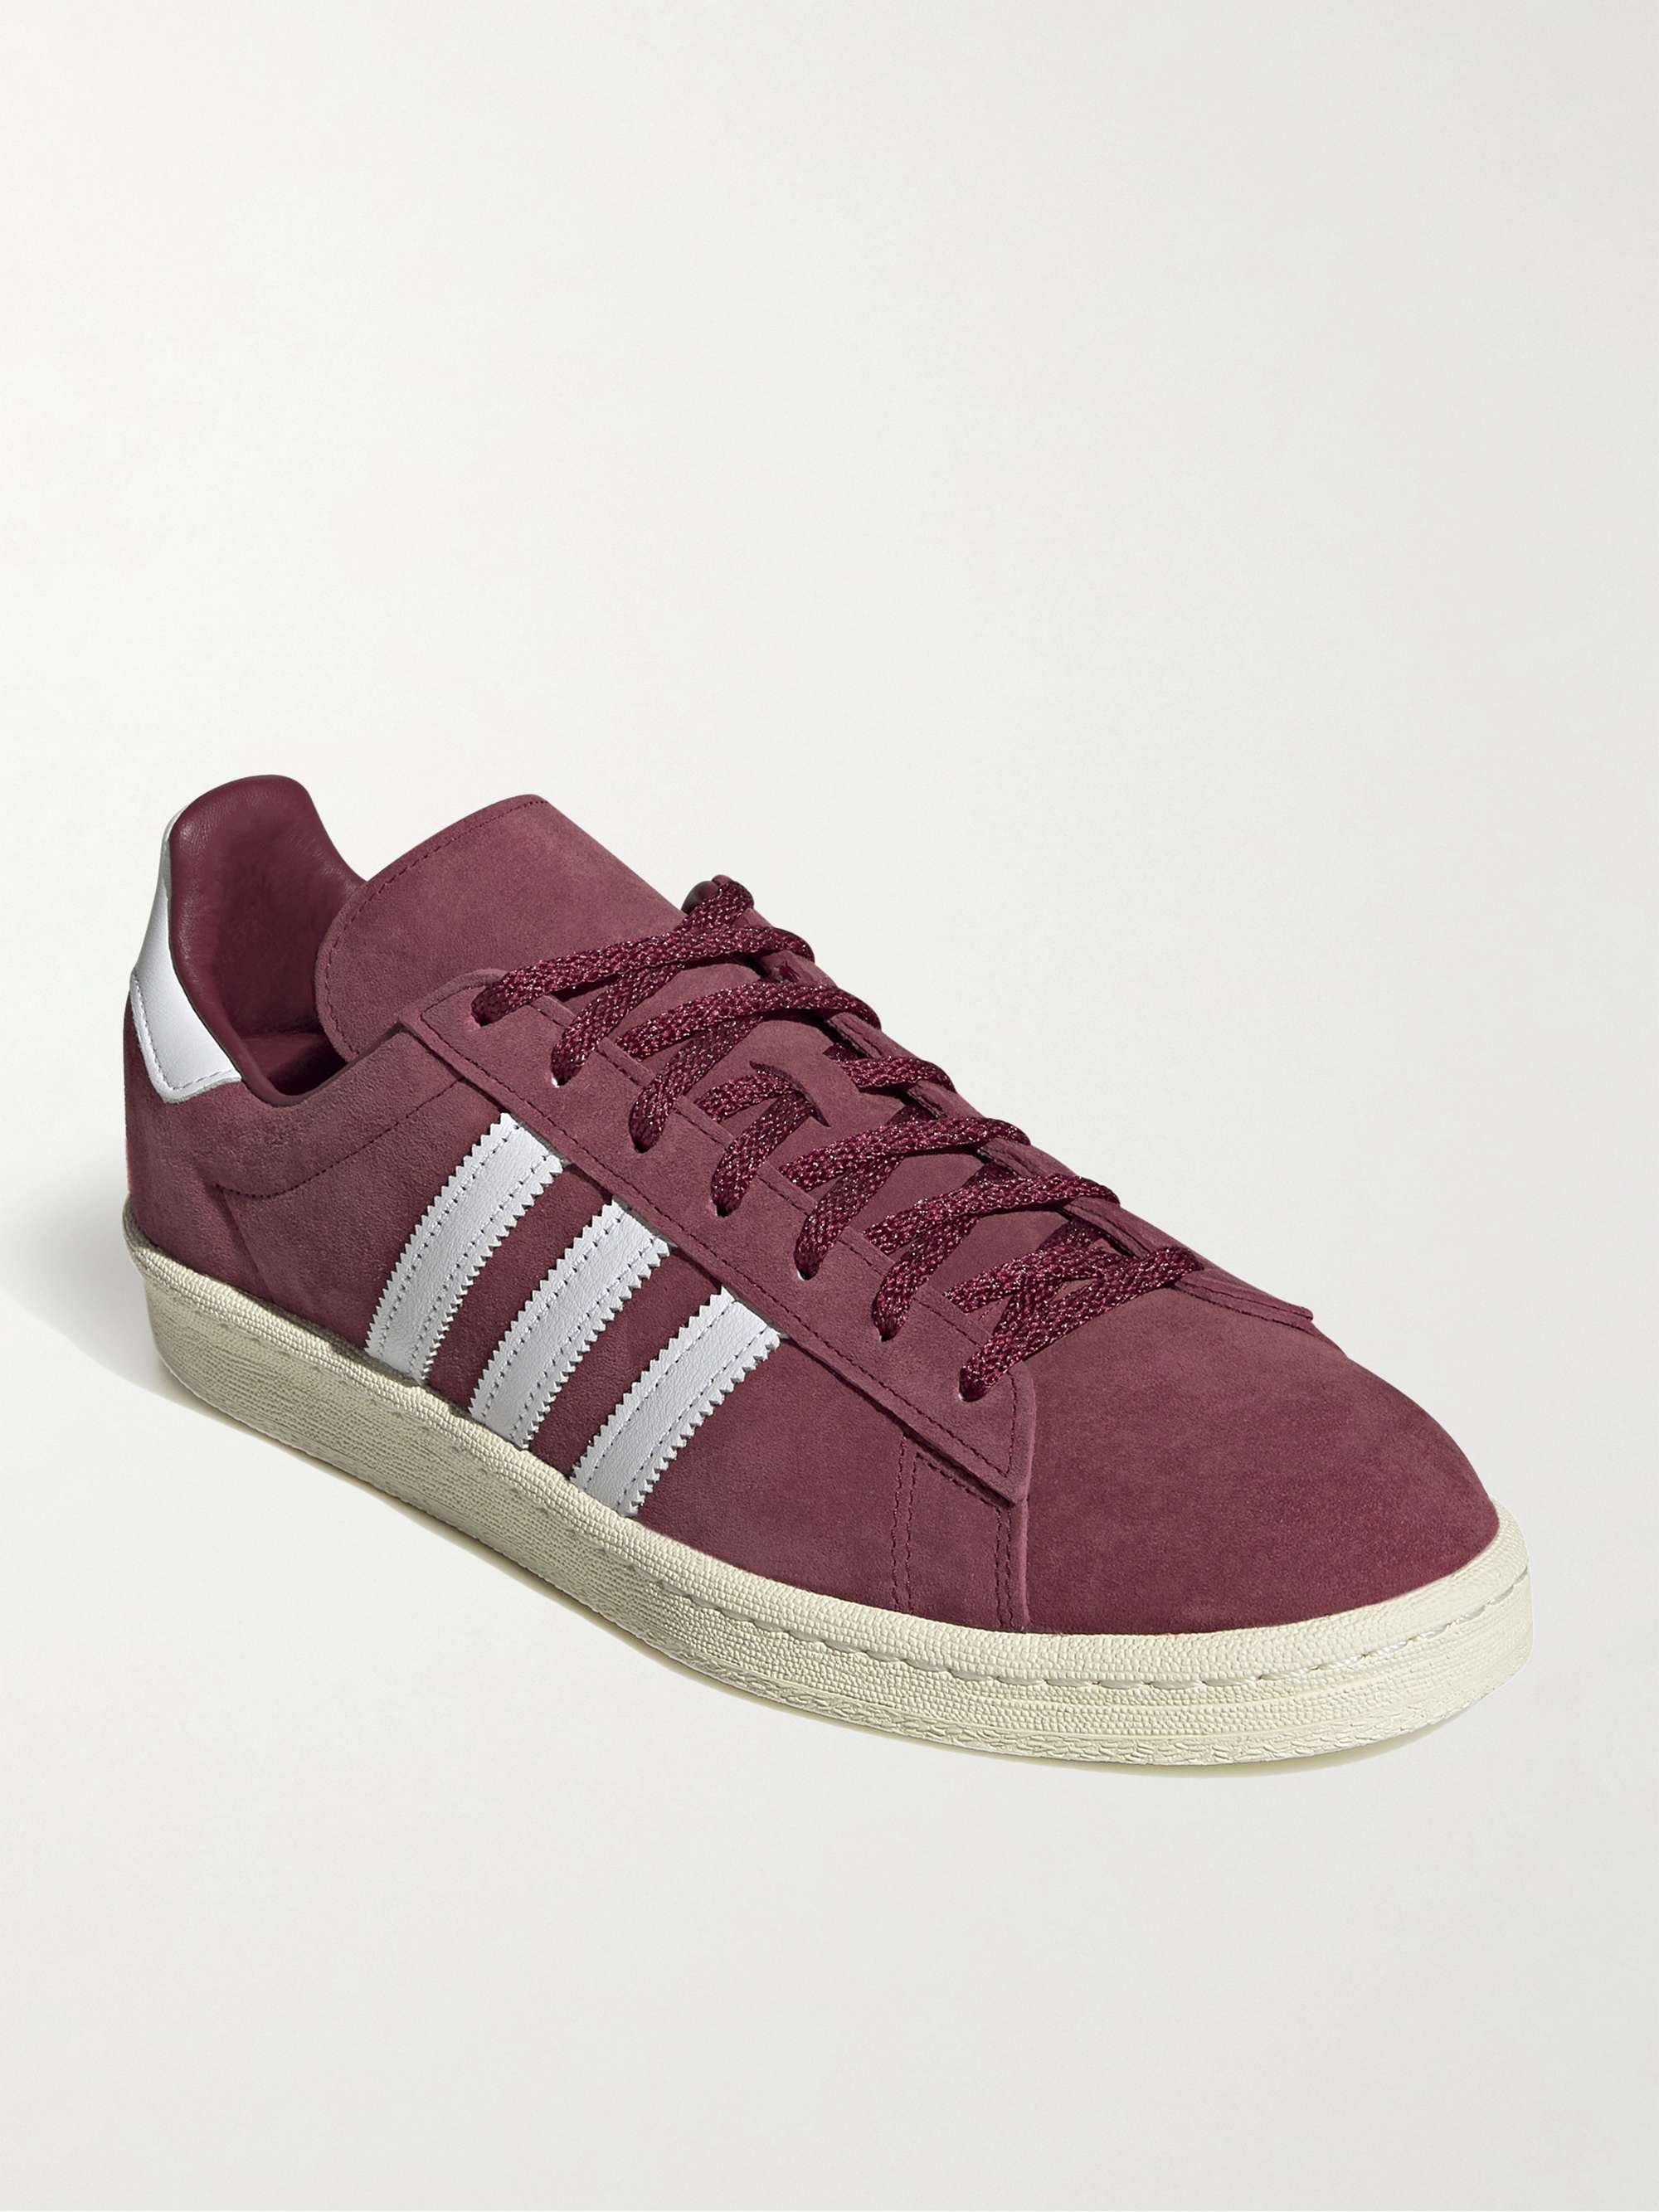 Red Campus 80s Leather-Trimmed Suede Sneakers | ADIDAS ORIGINALS | MR PORTER